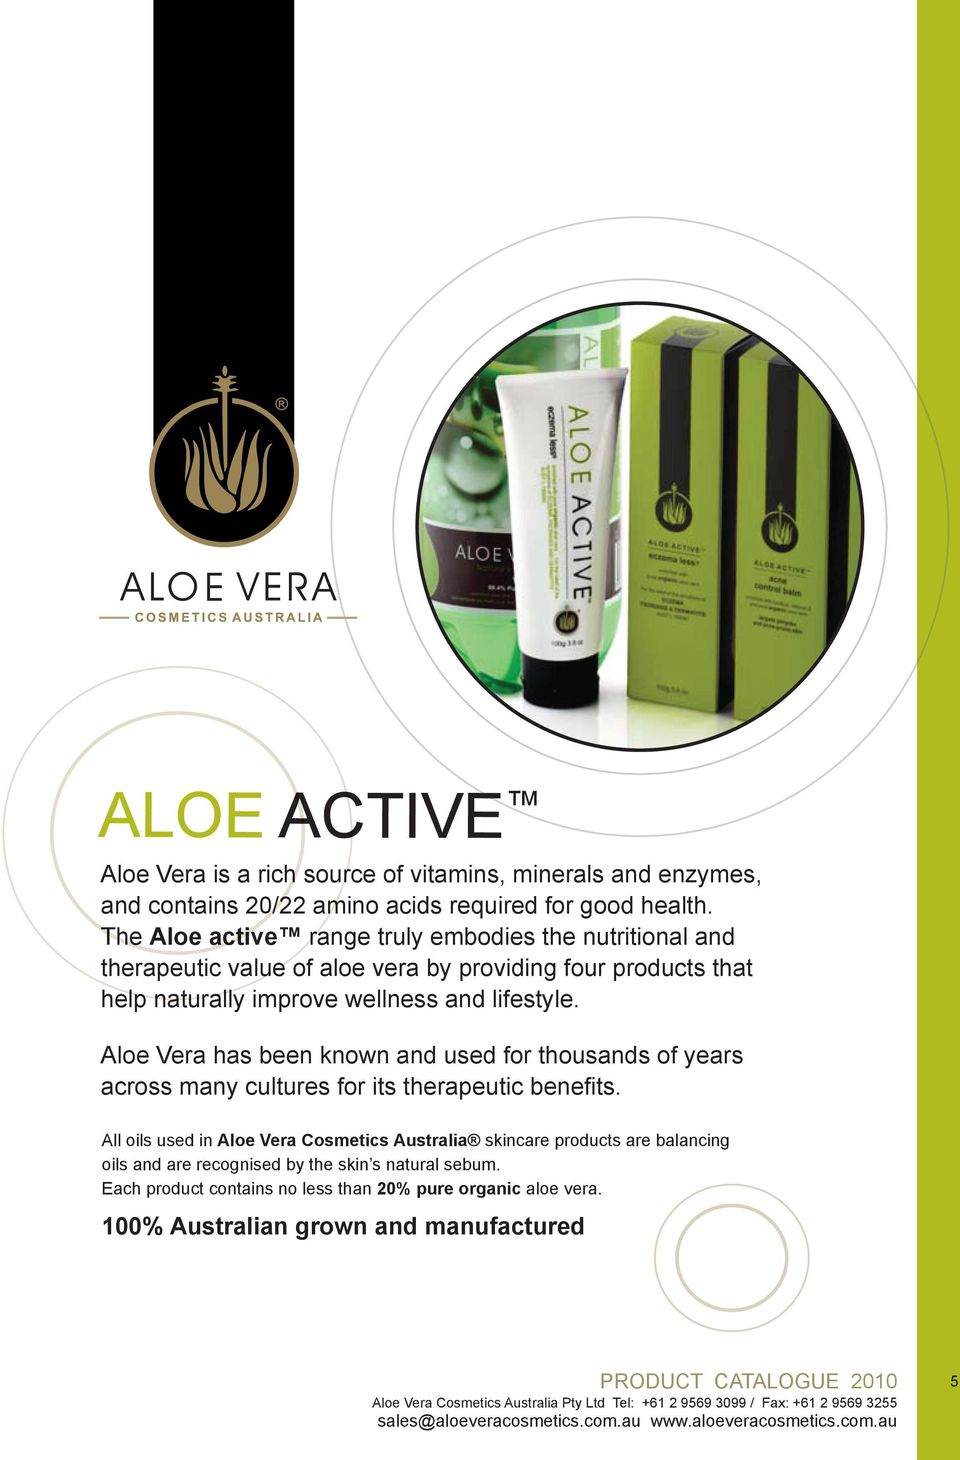 Aloe Vera has been known and used for thousands of years across many cultures for its therapeutic benefits.